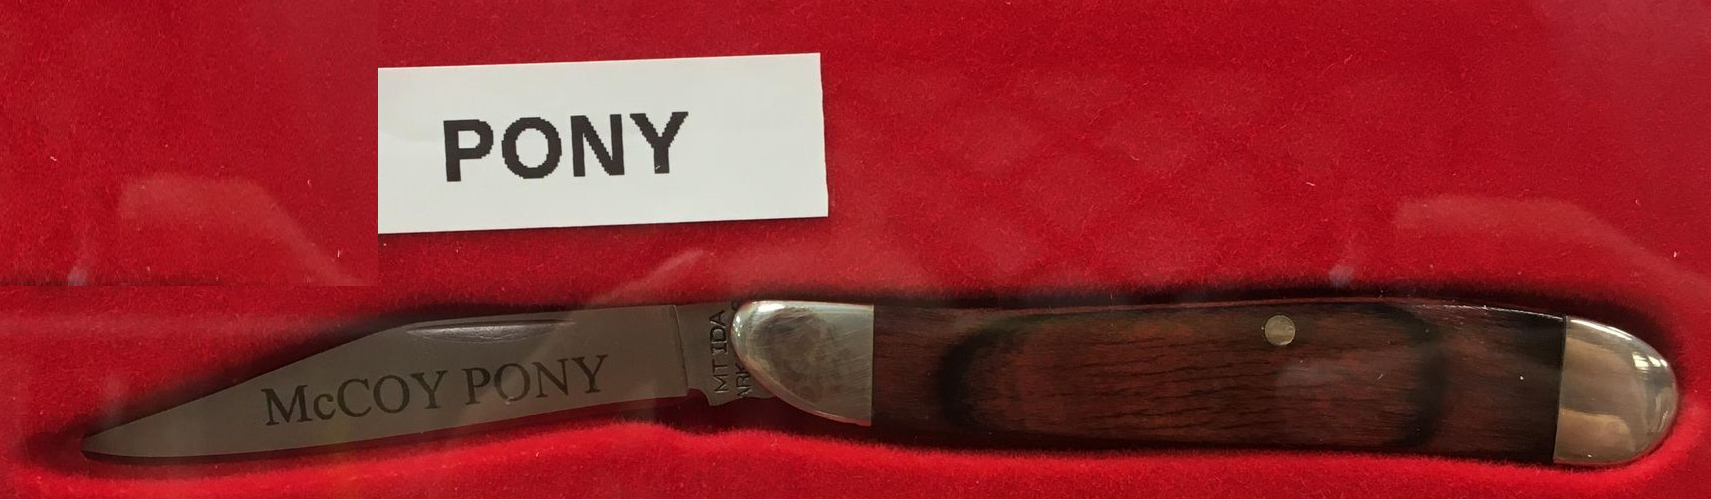 A knife with a McCoy Pony blade and rosewood handle, featuring the word pony.